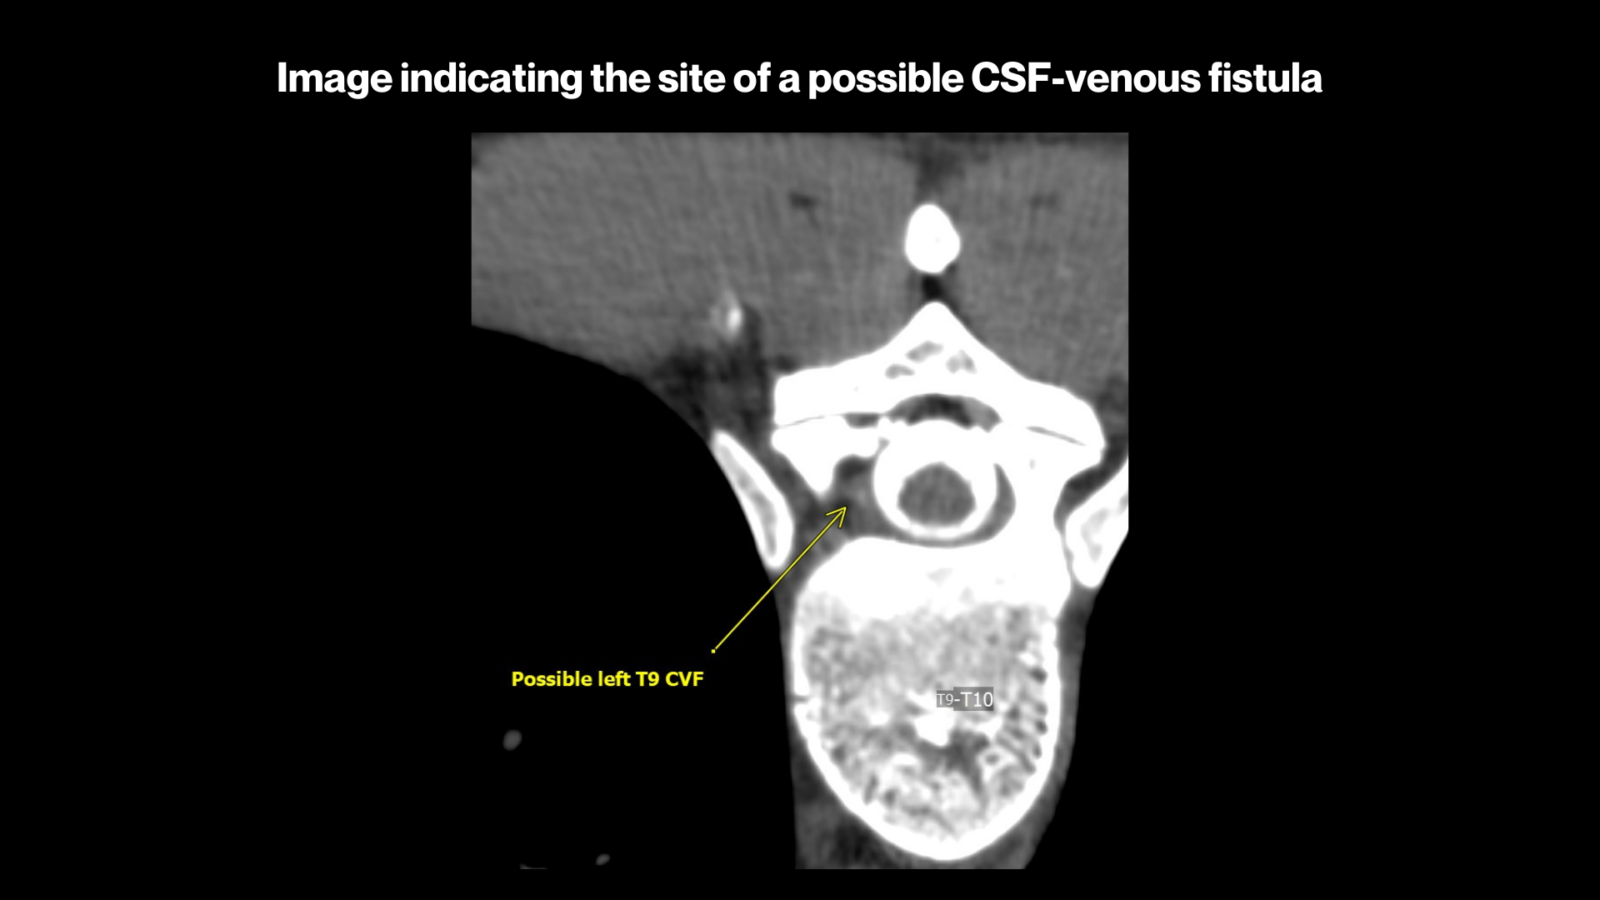 Hailey's story: A medical image indicating the site of a possible CSF-venous fistula
